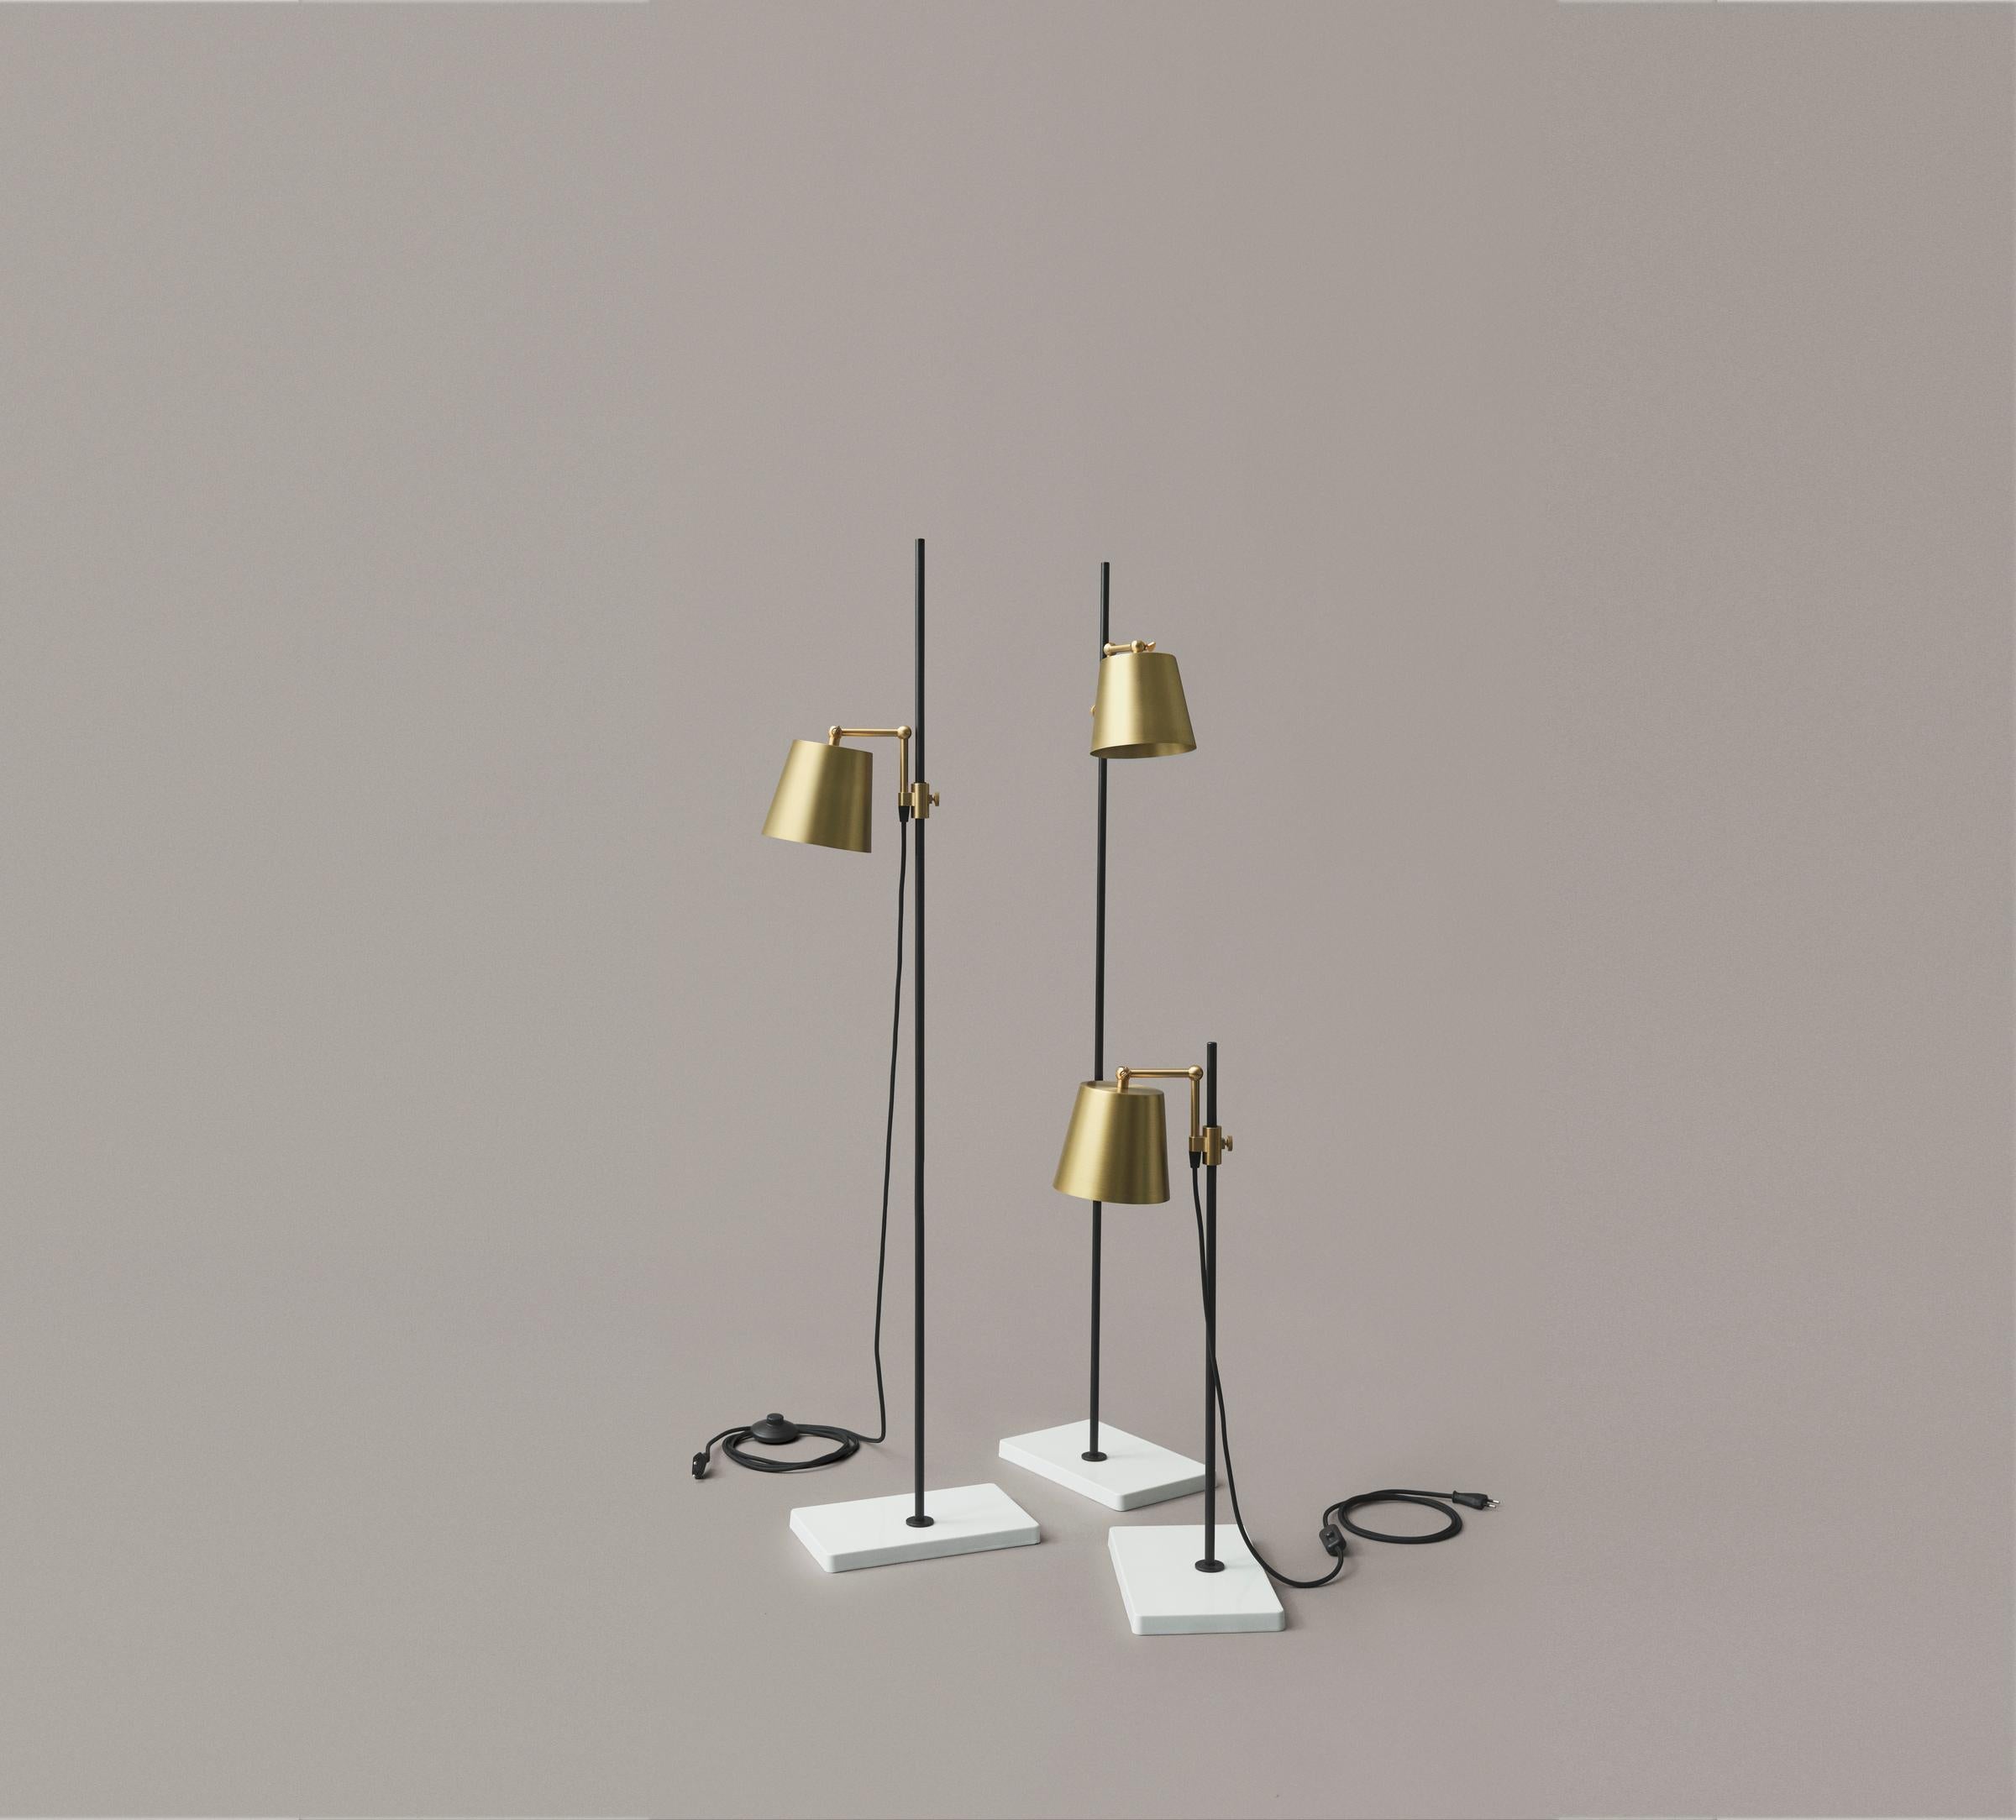 Table and floor lamps designed by Anatomy Design in 2010. 
Two table lamps and one floor lamp in this set.

The Lab Light design came about from a genuine fascination with laboratory equipment and with all those fantastic clamps and levers — the